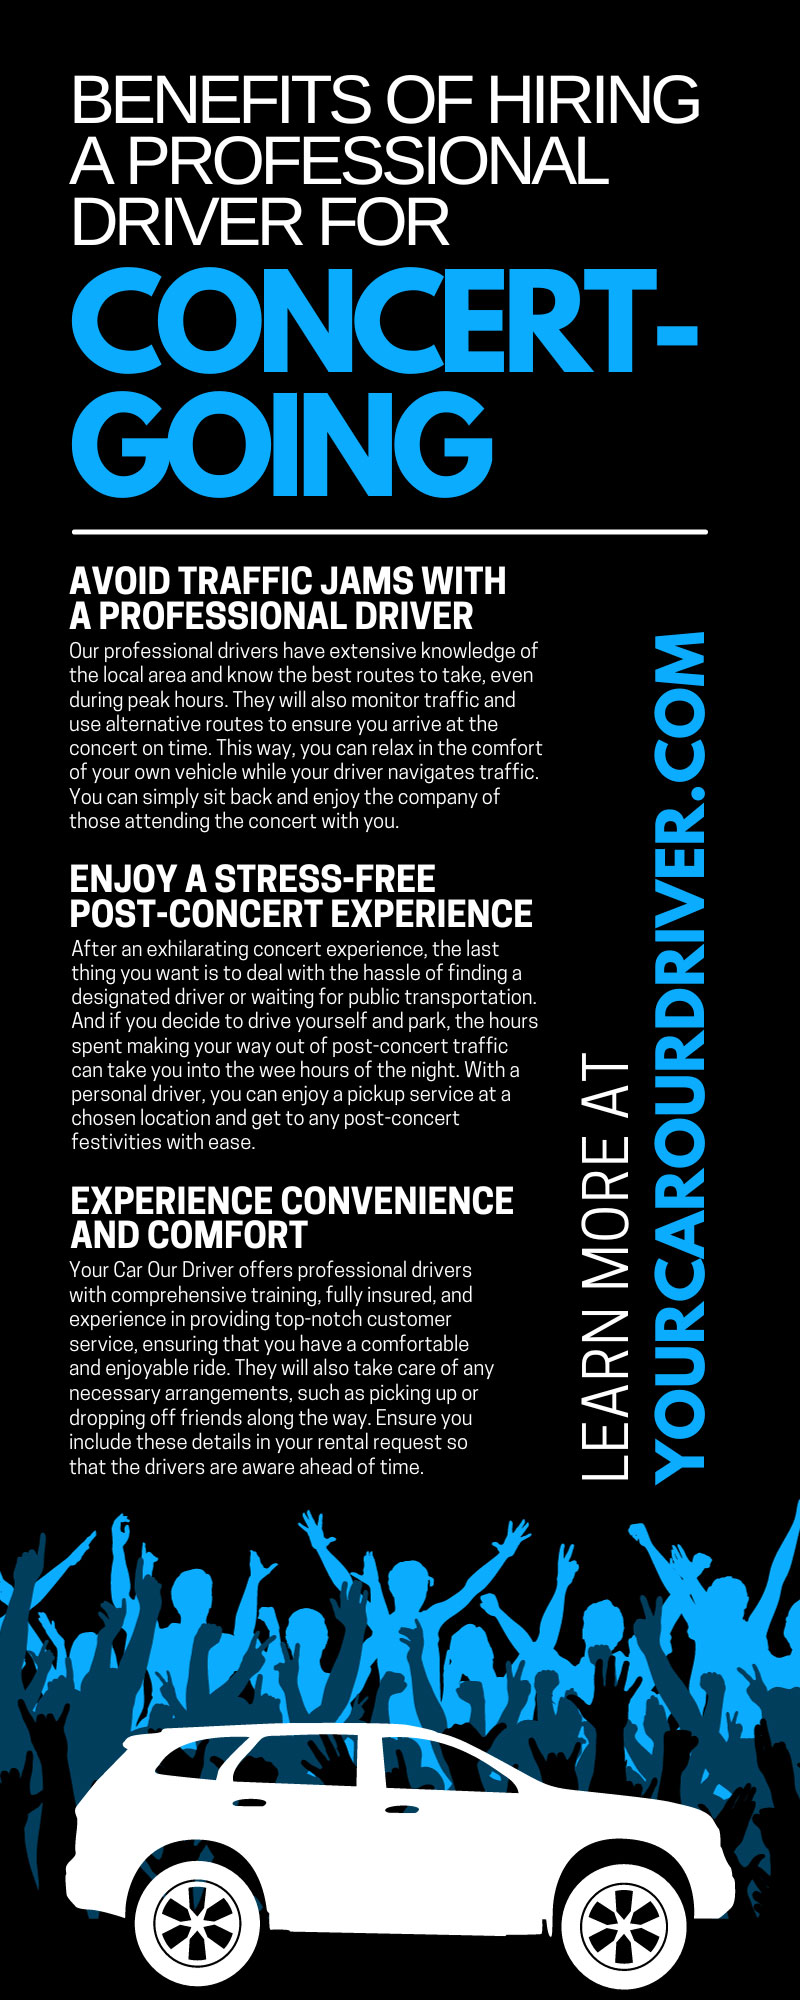 Benefits of Hiring a Professional Driver for Concert-Going